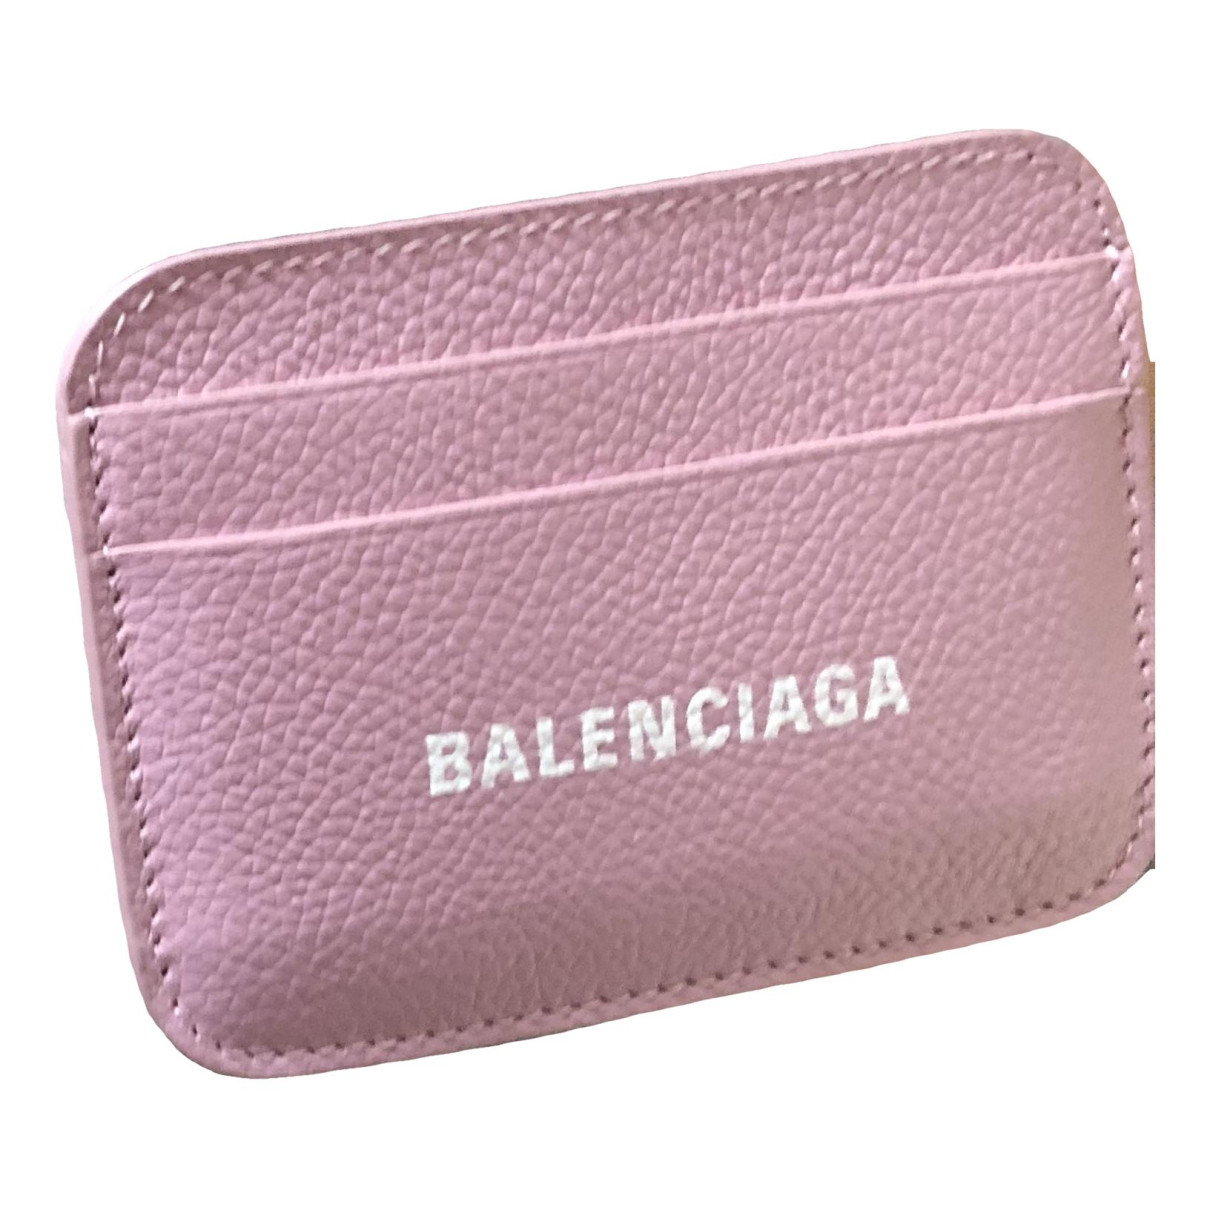 accessories Balenciaga purses, wallets & cases for Female Leather. Used condition